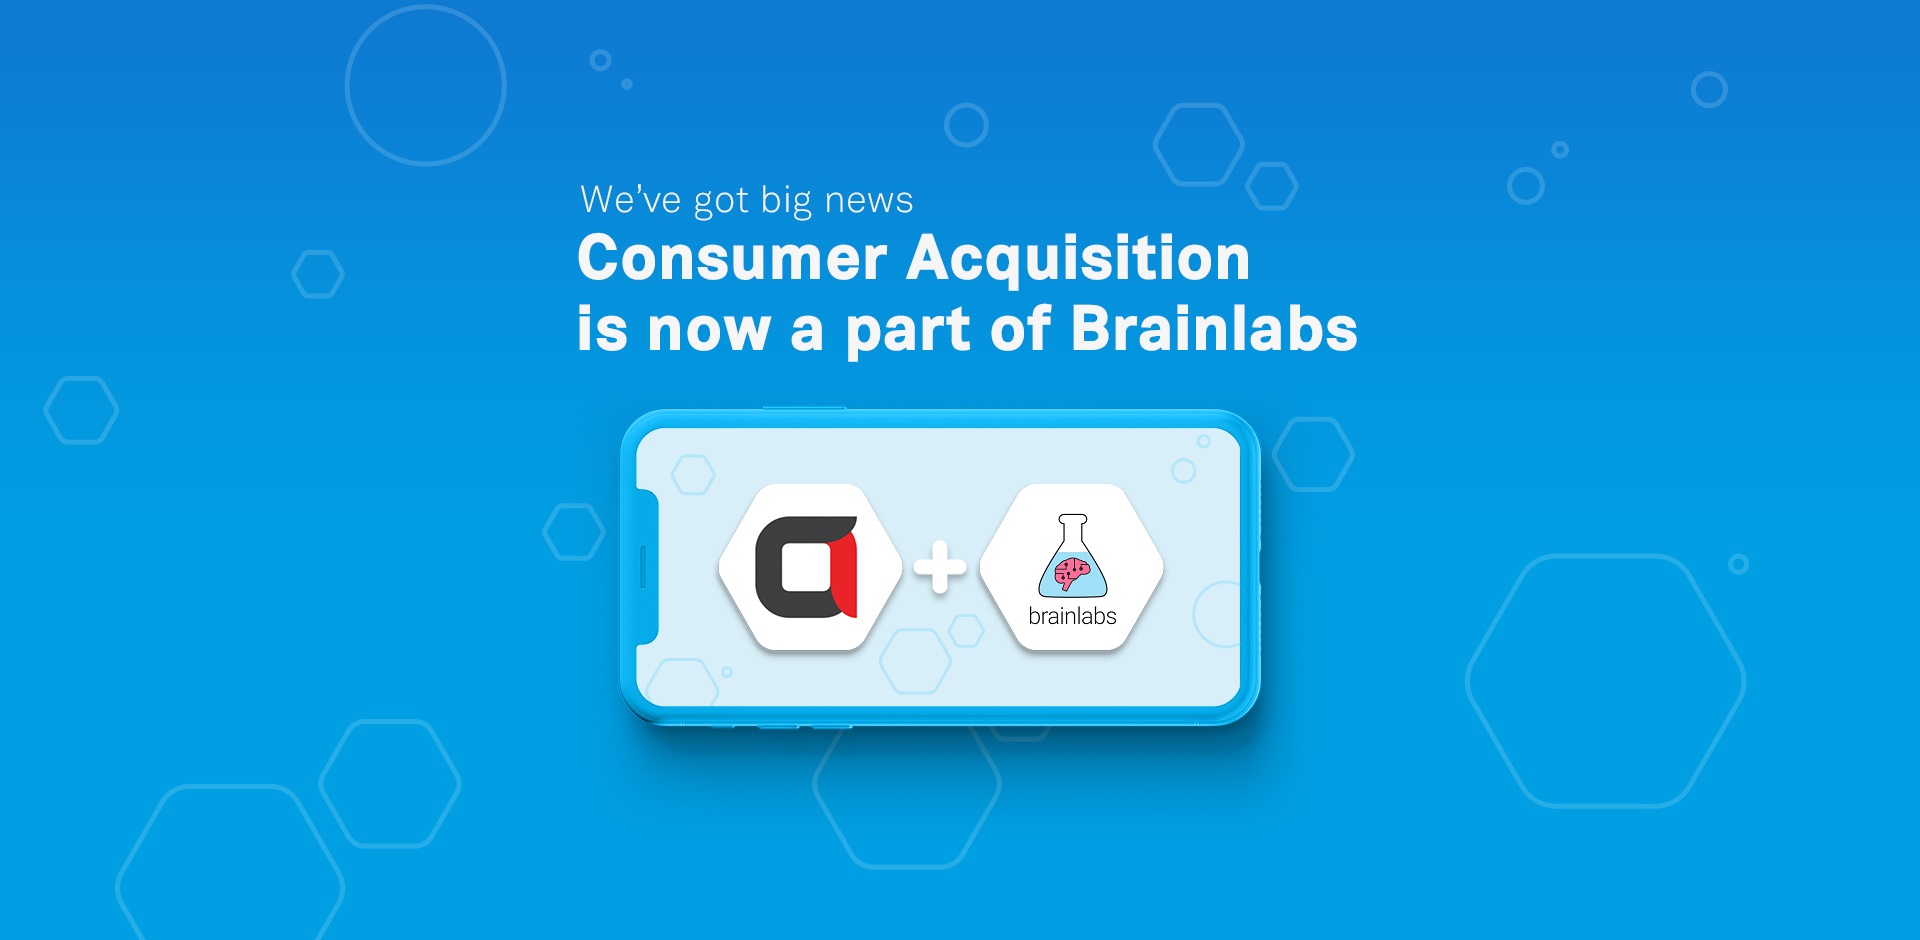 Consumer Acquisition Acquired by Brainlabs